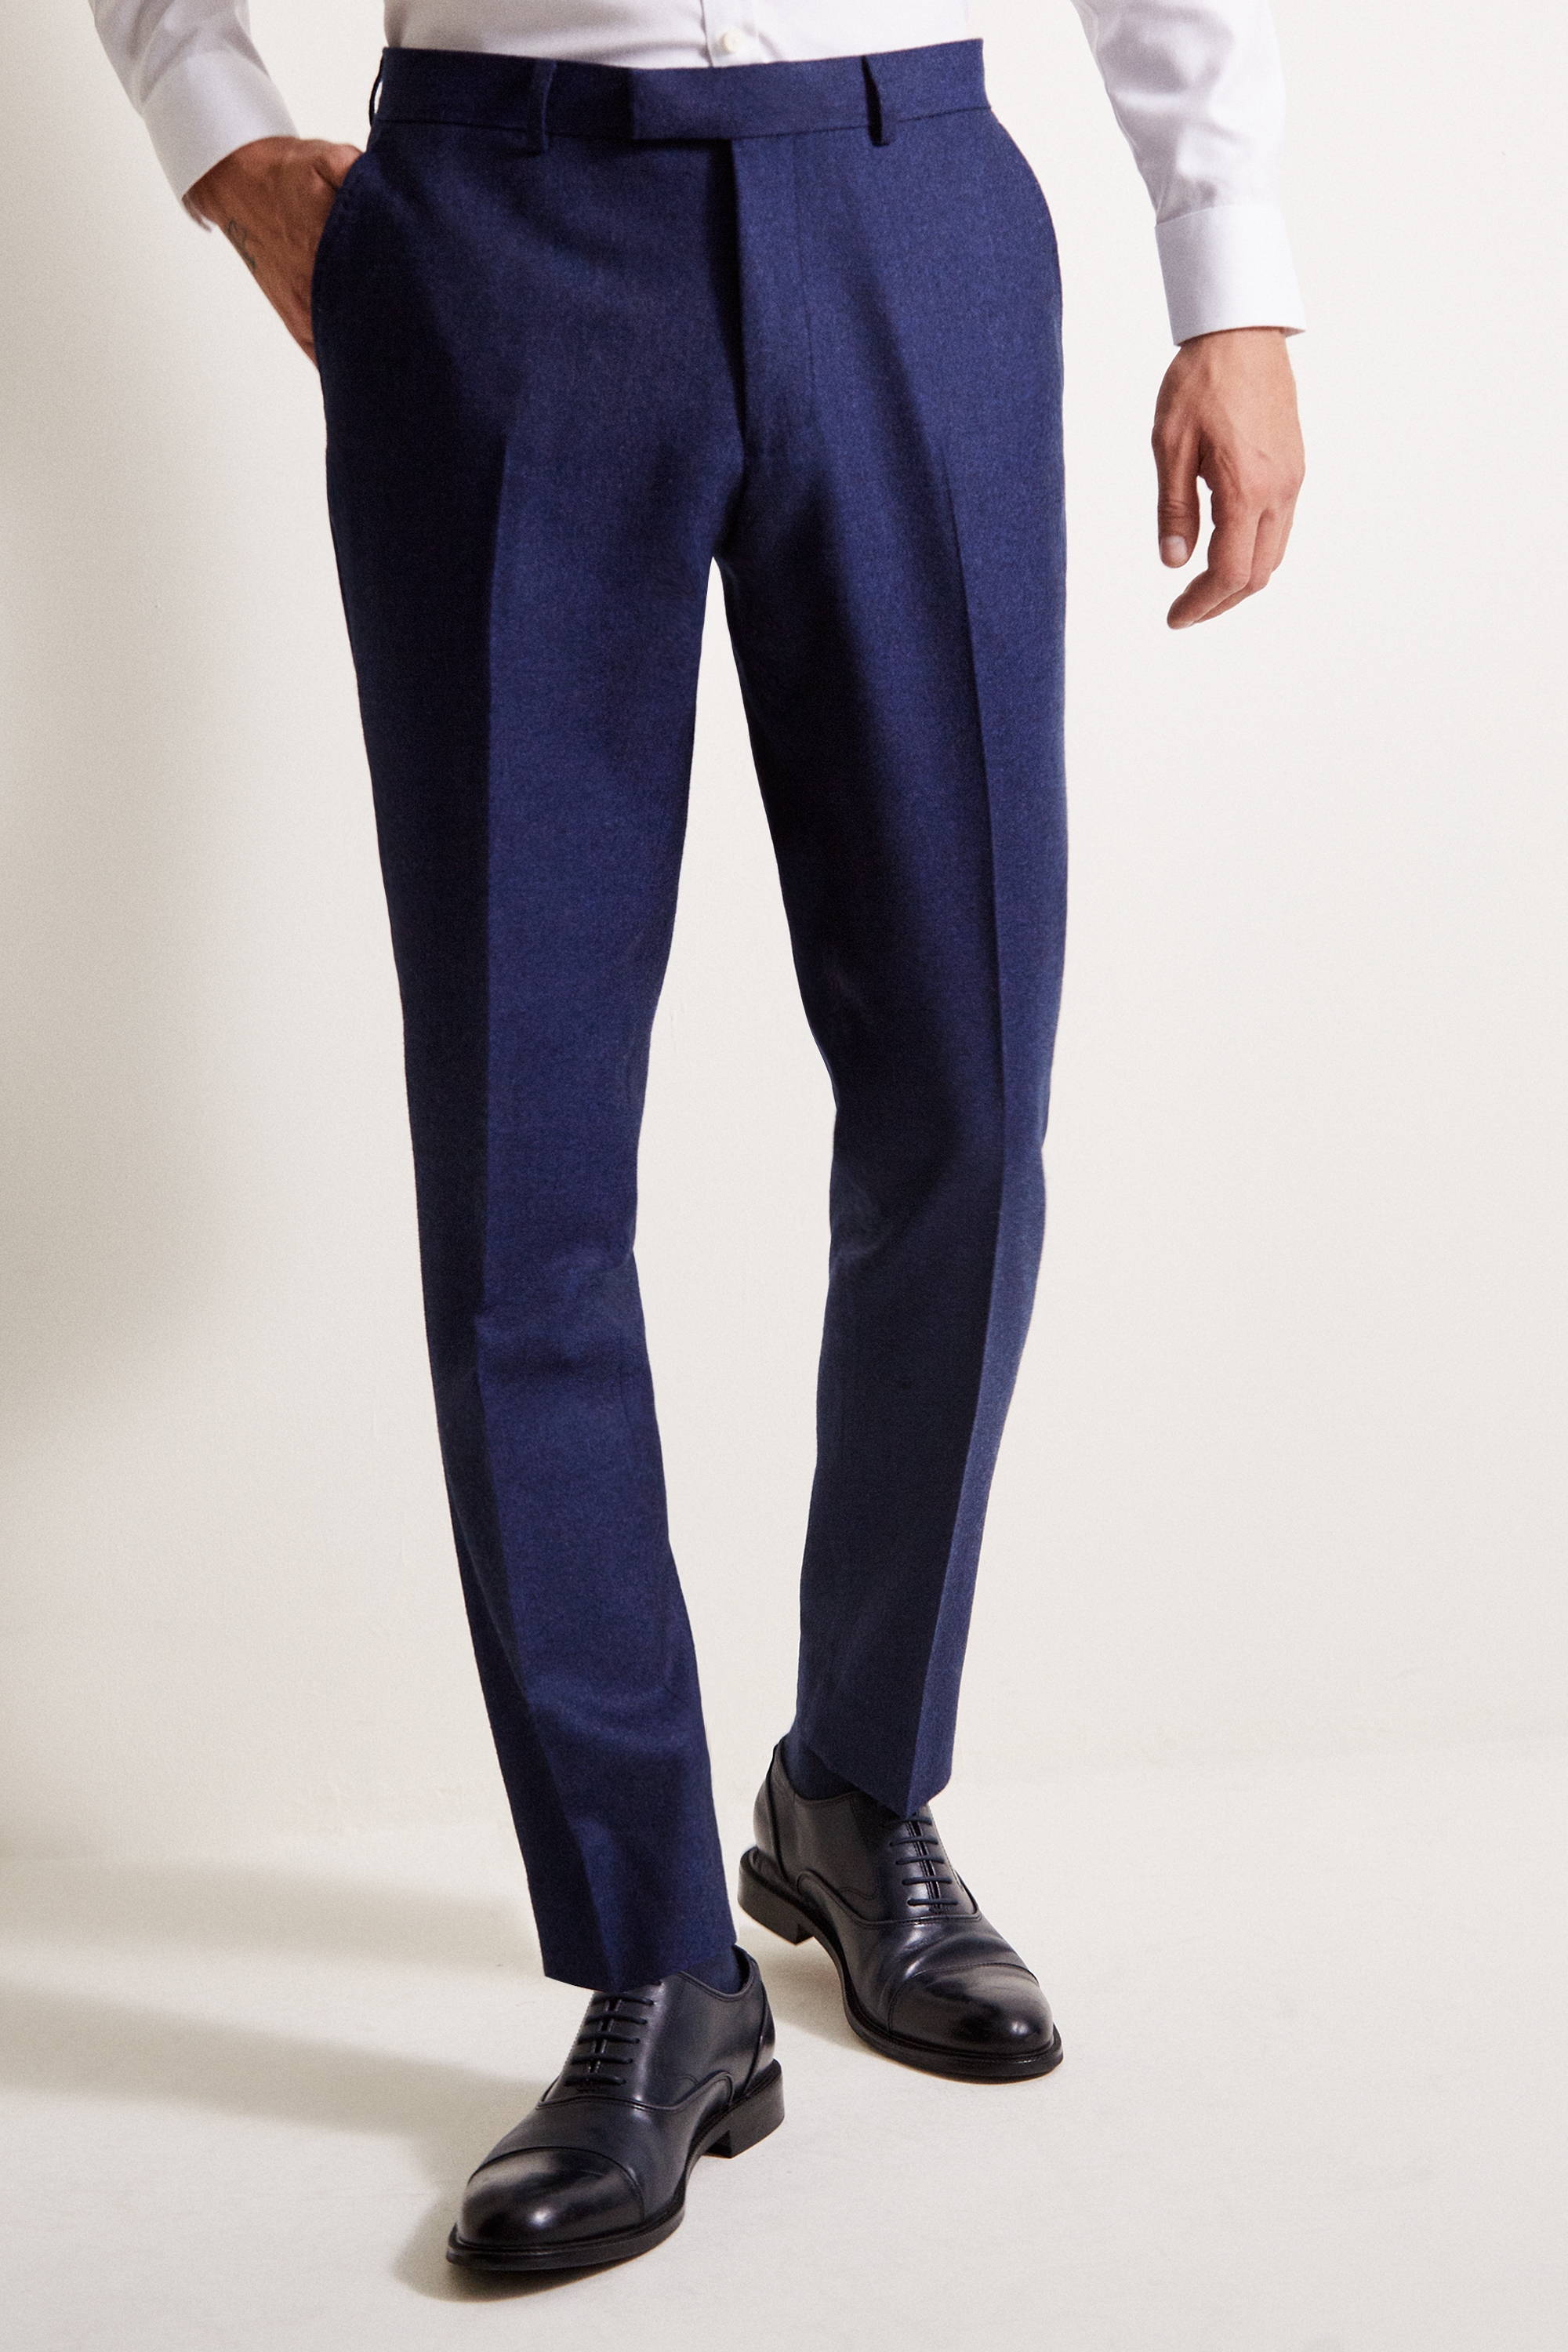 Moss 1851 Tailored Fit Plain Blue Flannel Trousers